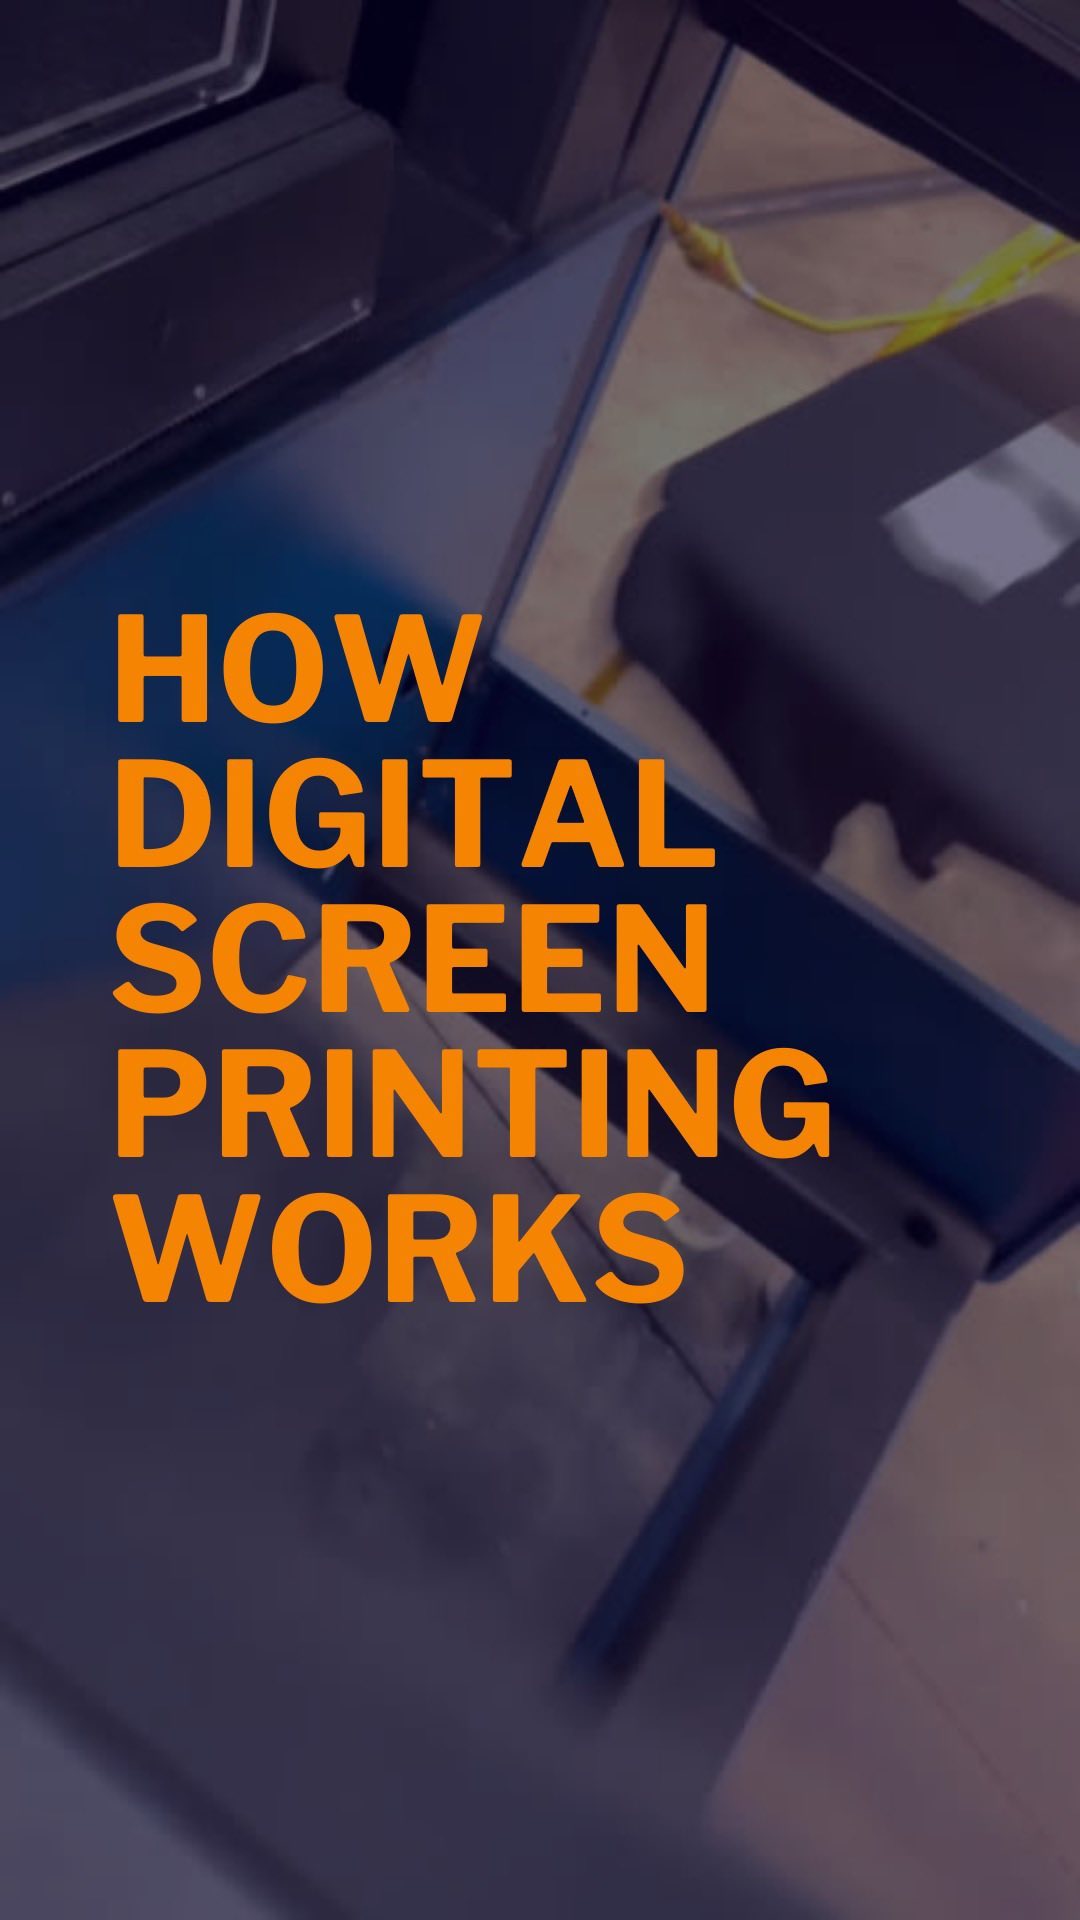 Explanatory graphic on the process of digital screen printing.